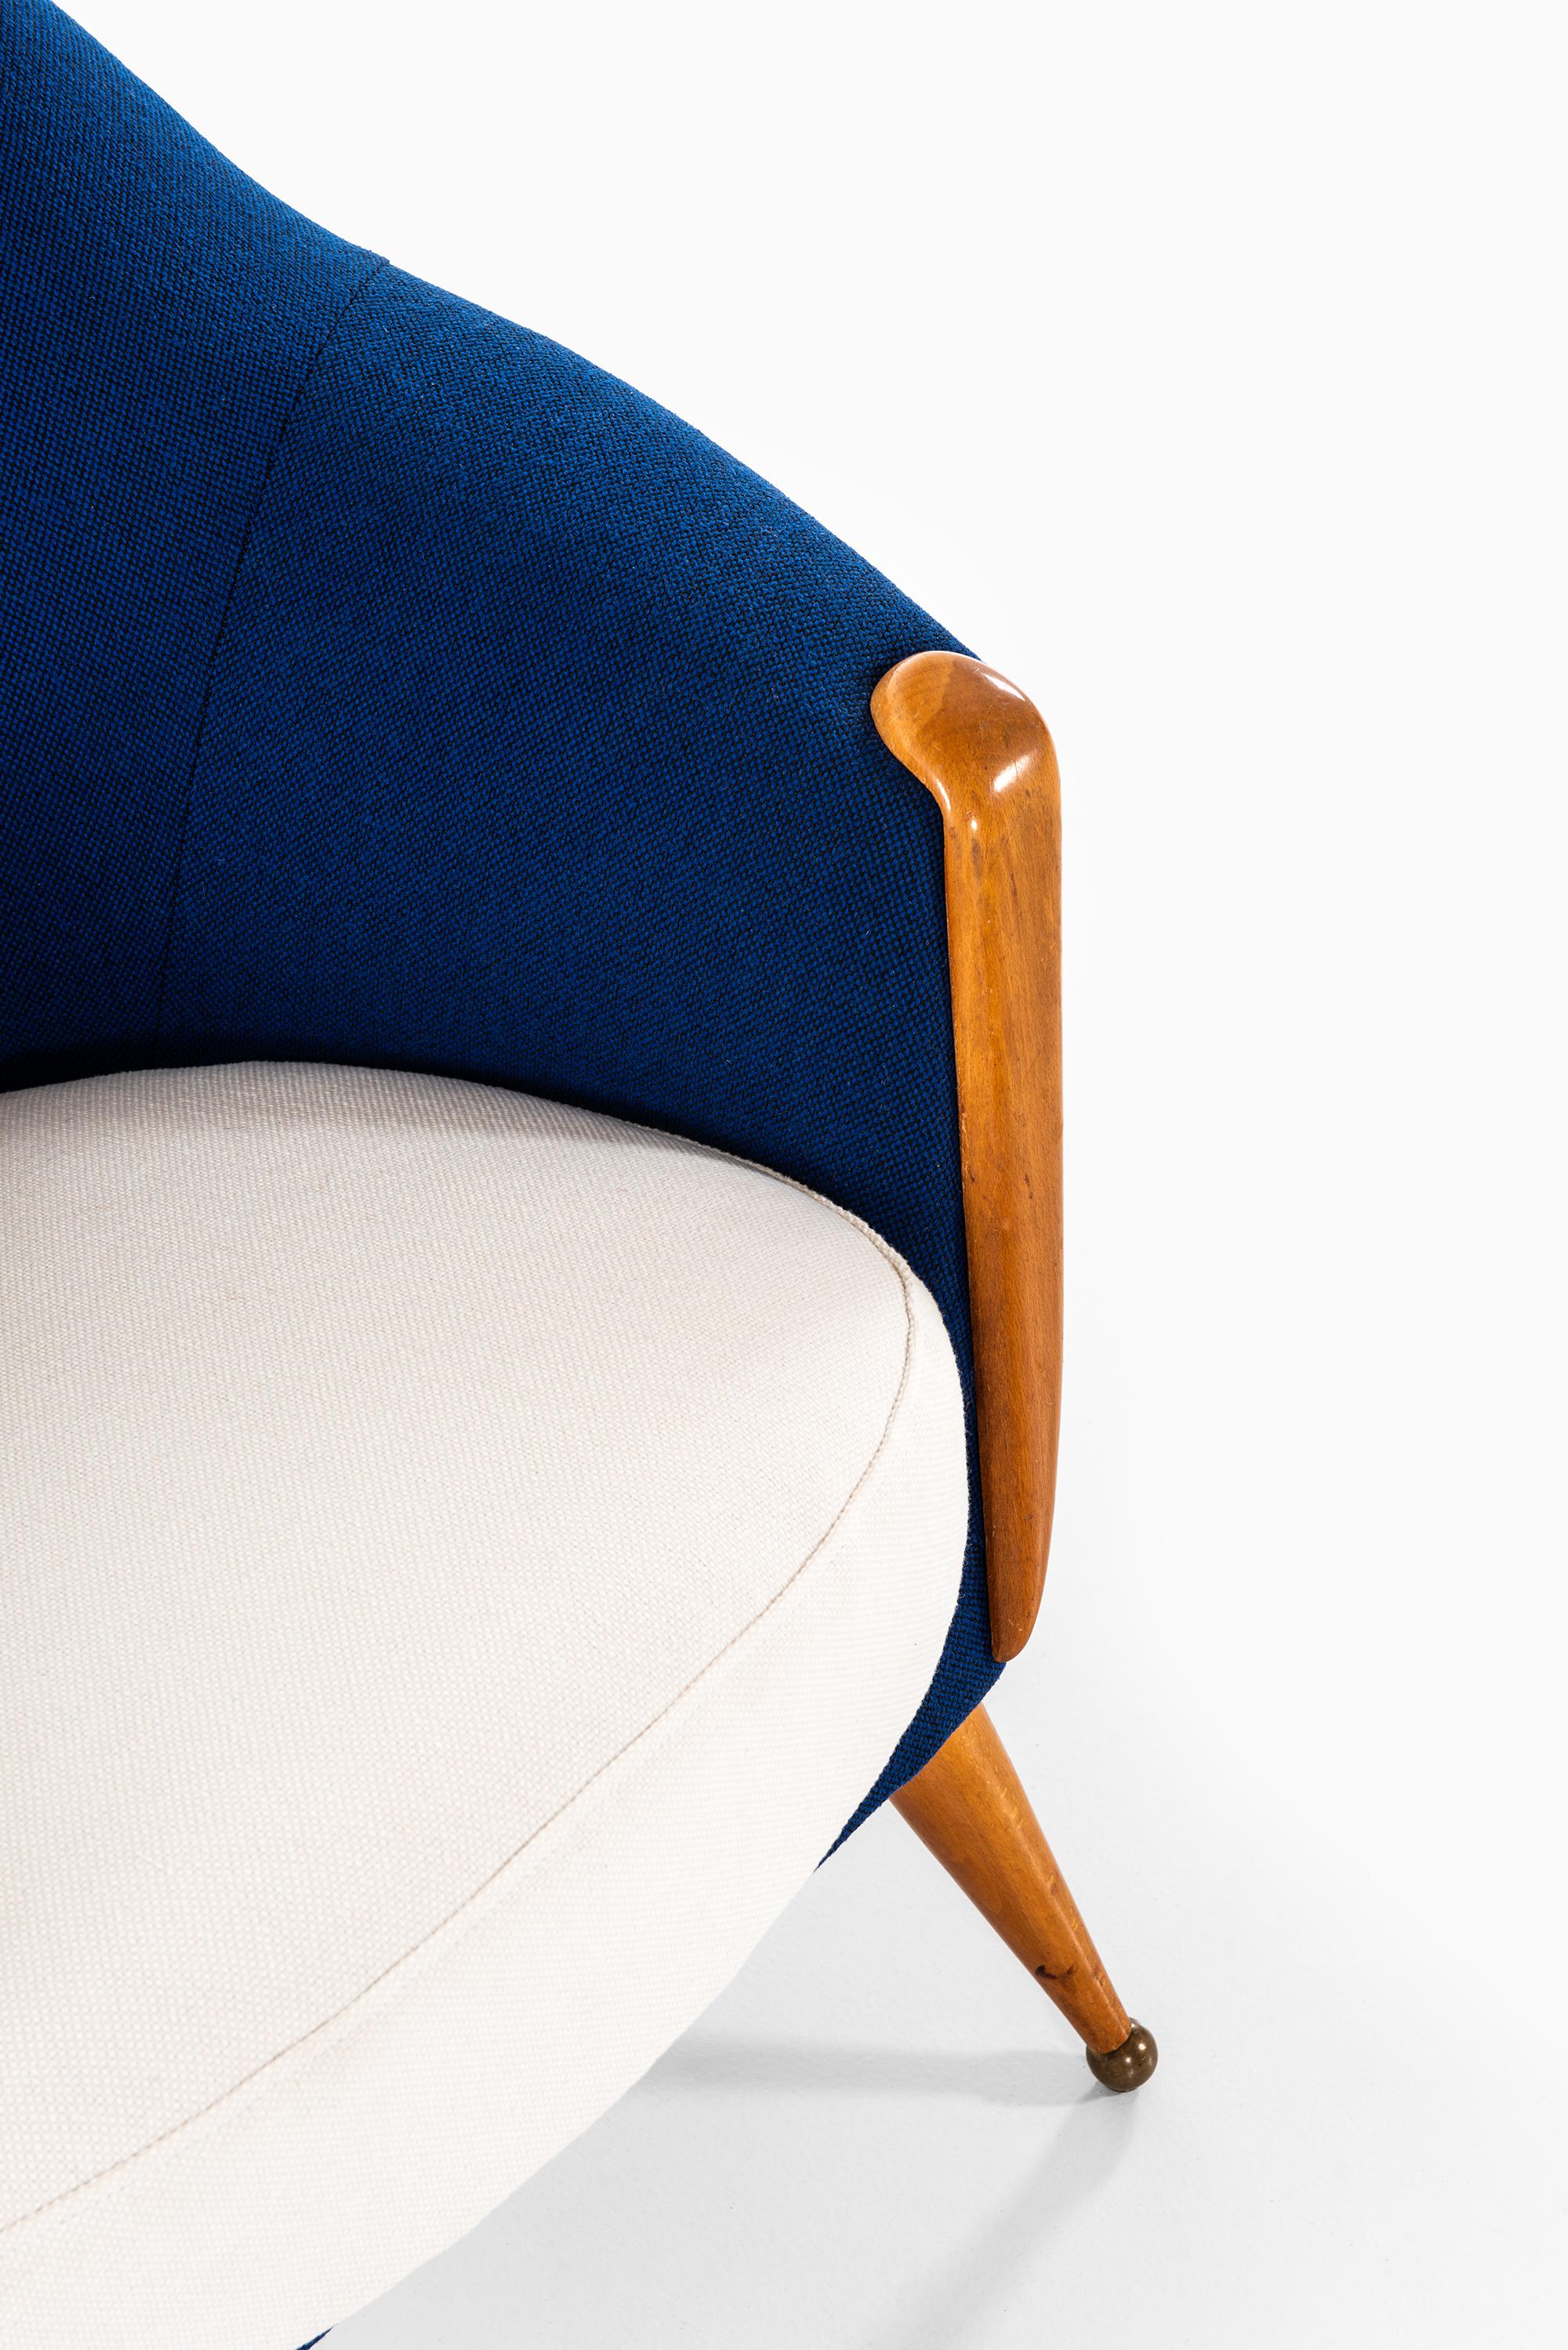 Rare easy chair model Orion designed by Folke Jansson. Produced by SM Wincrantz in Sweden.